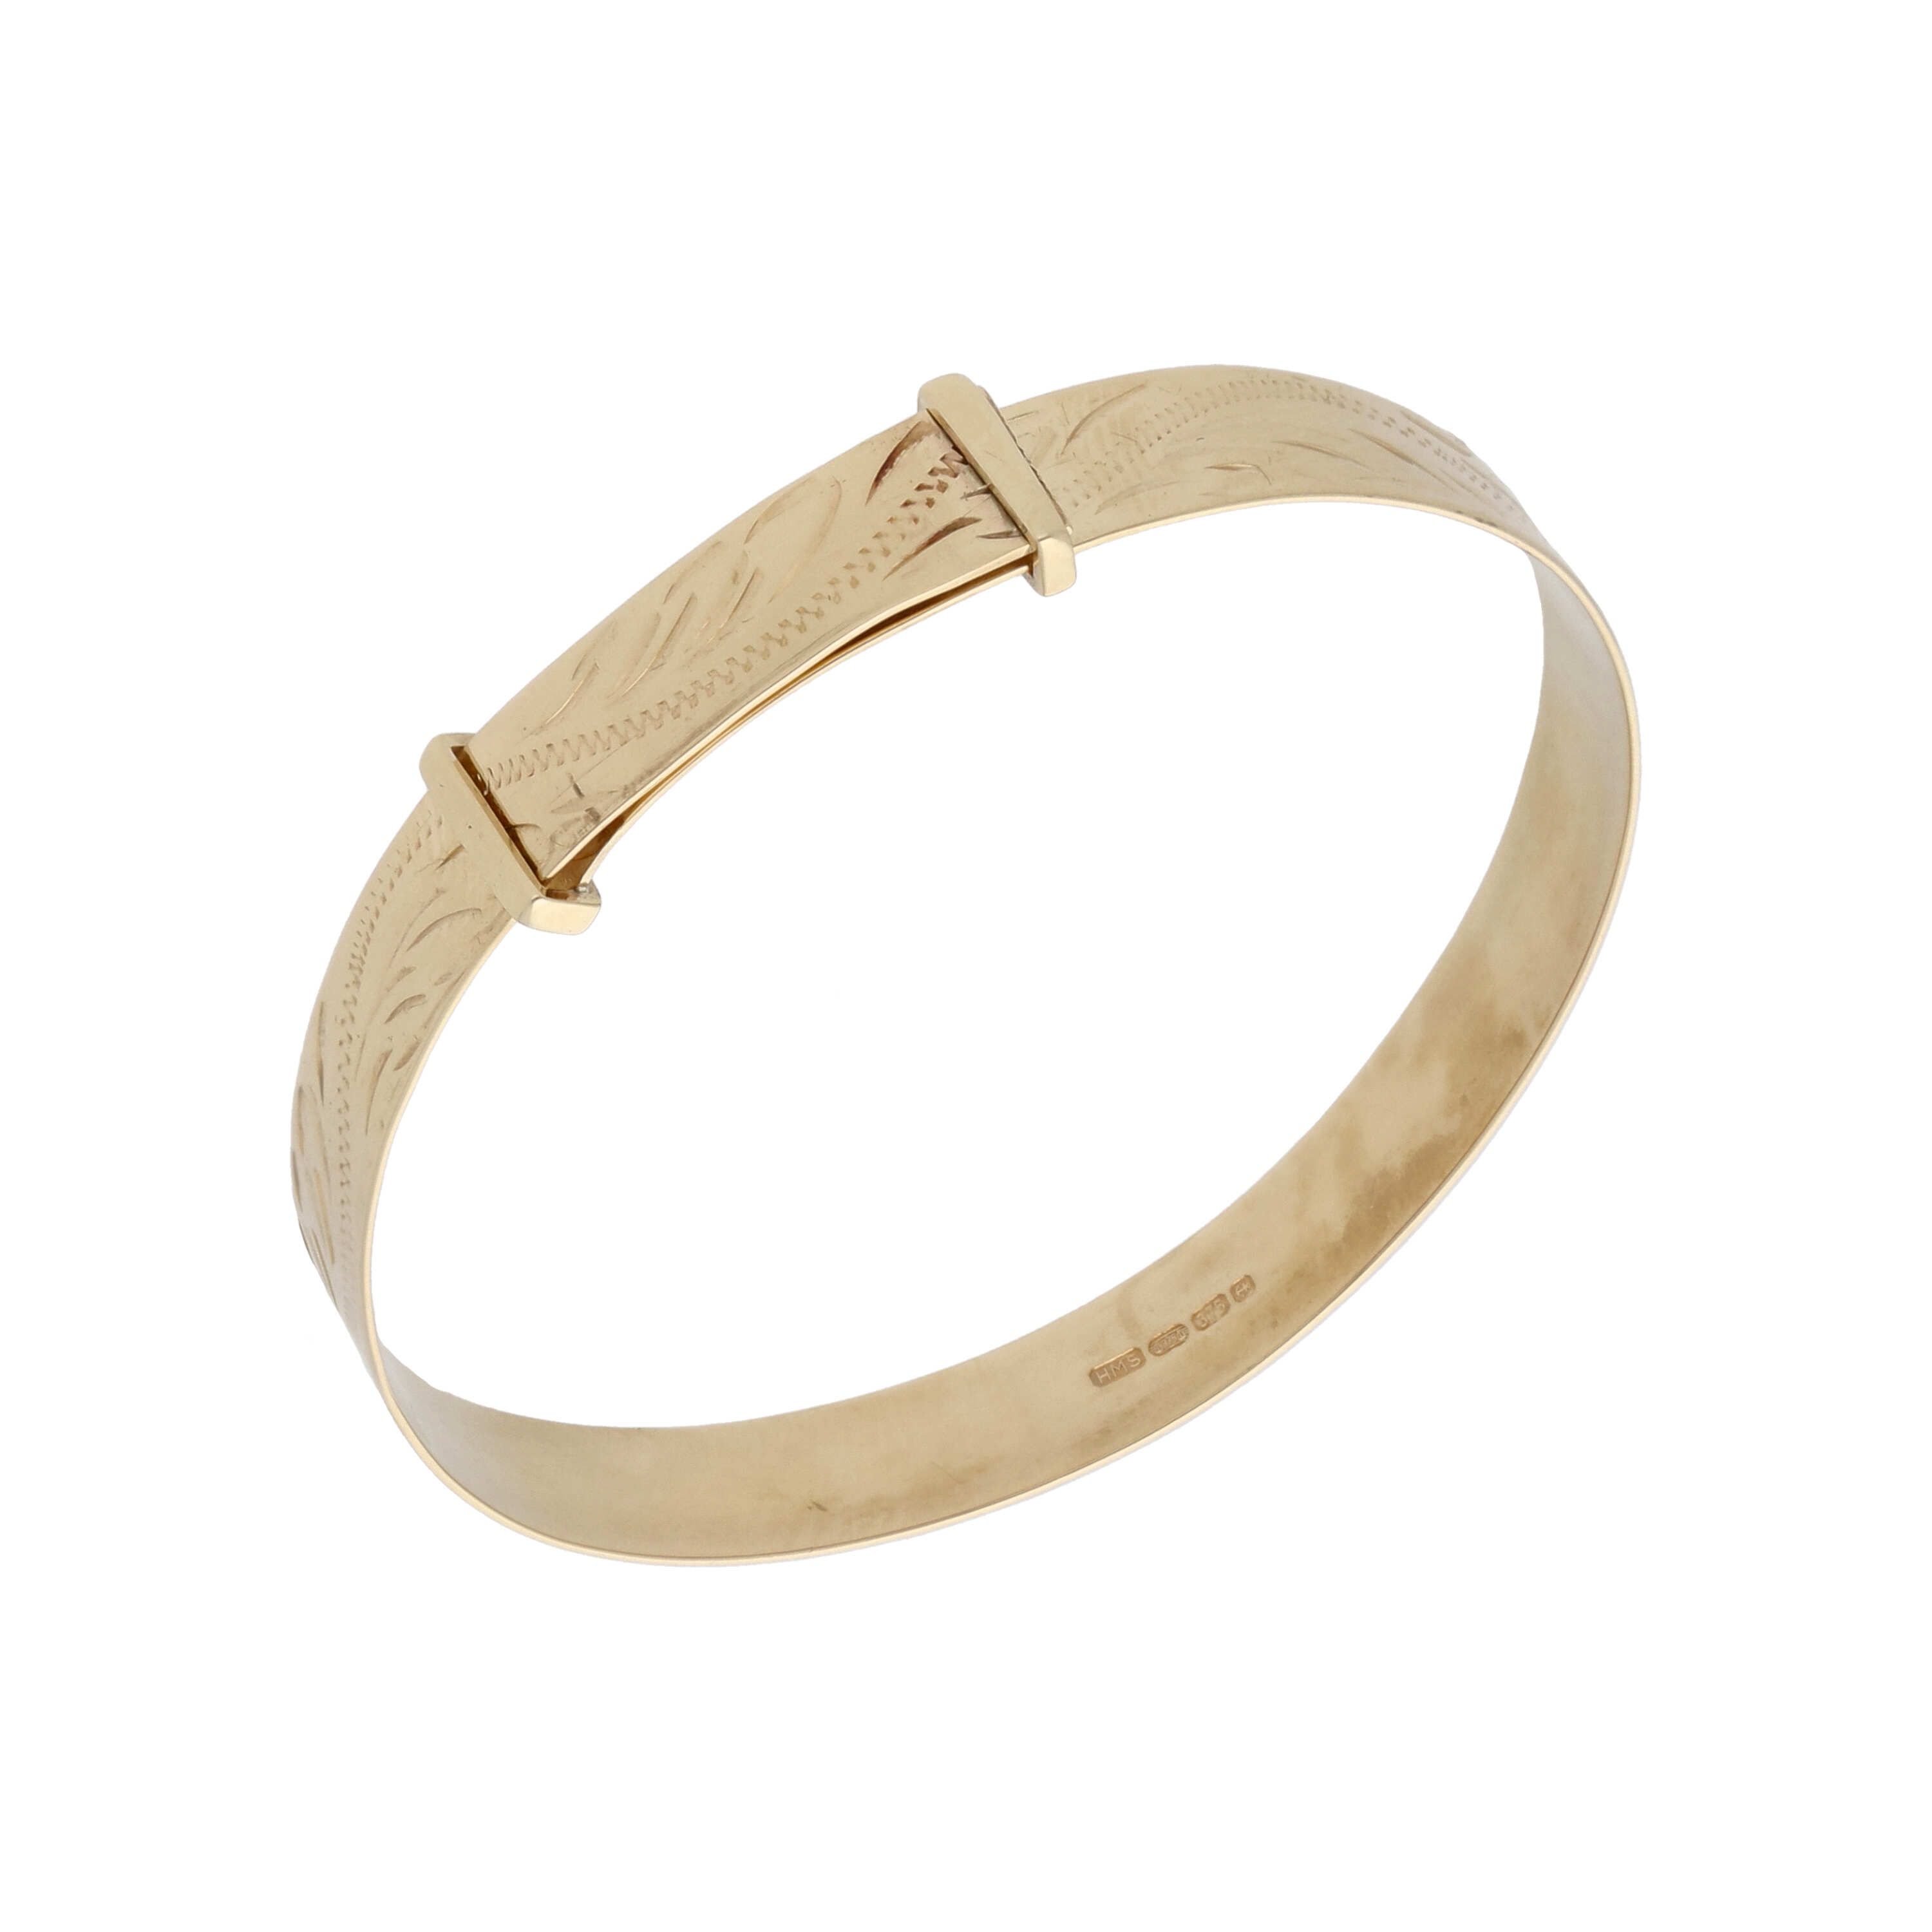 9ct Yellow Gold Patterned Expanding Childs Bangle